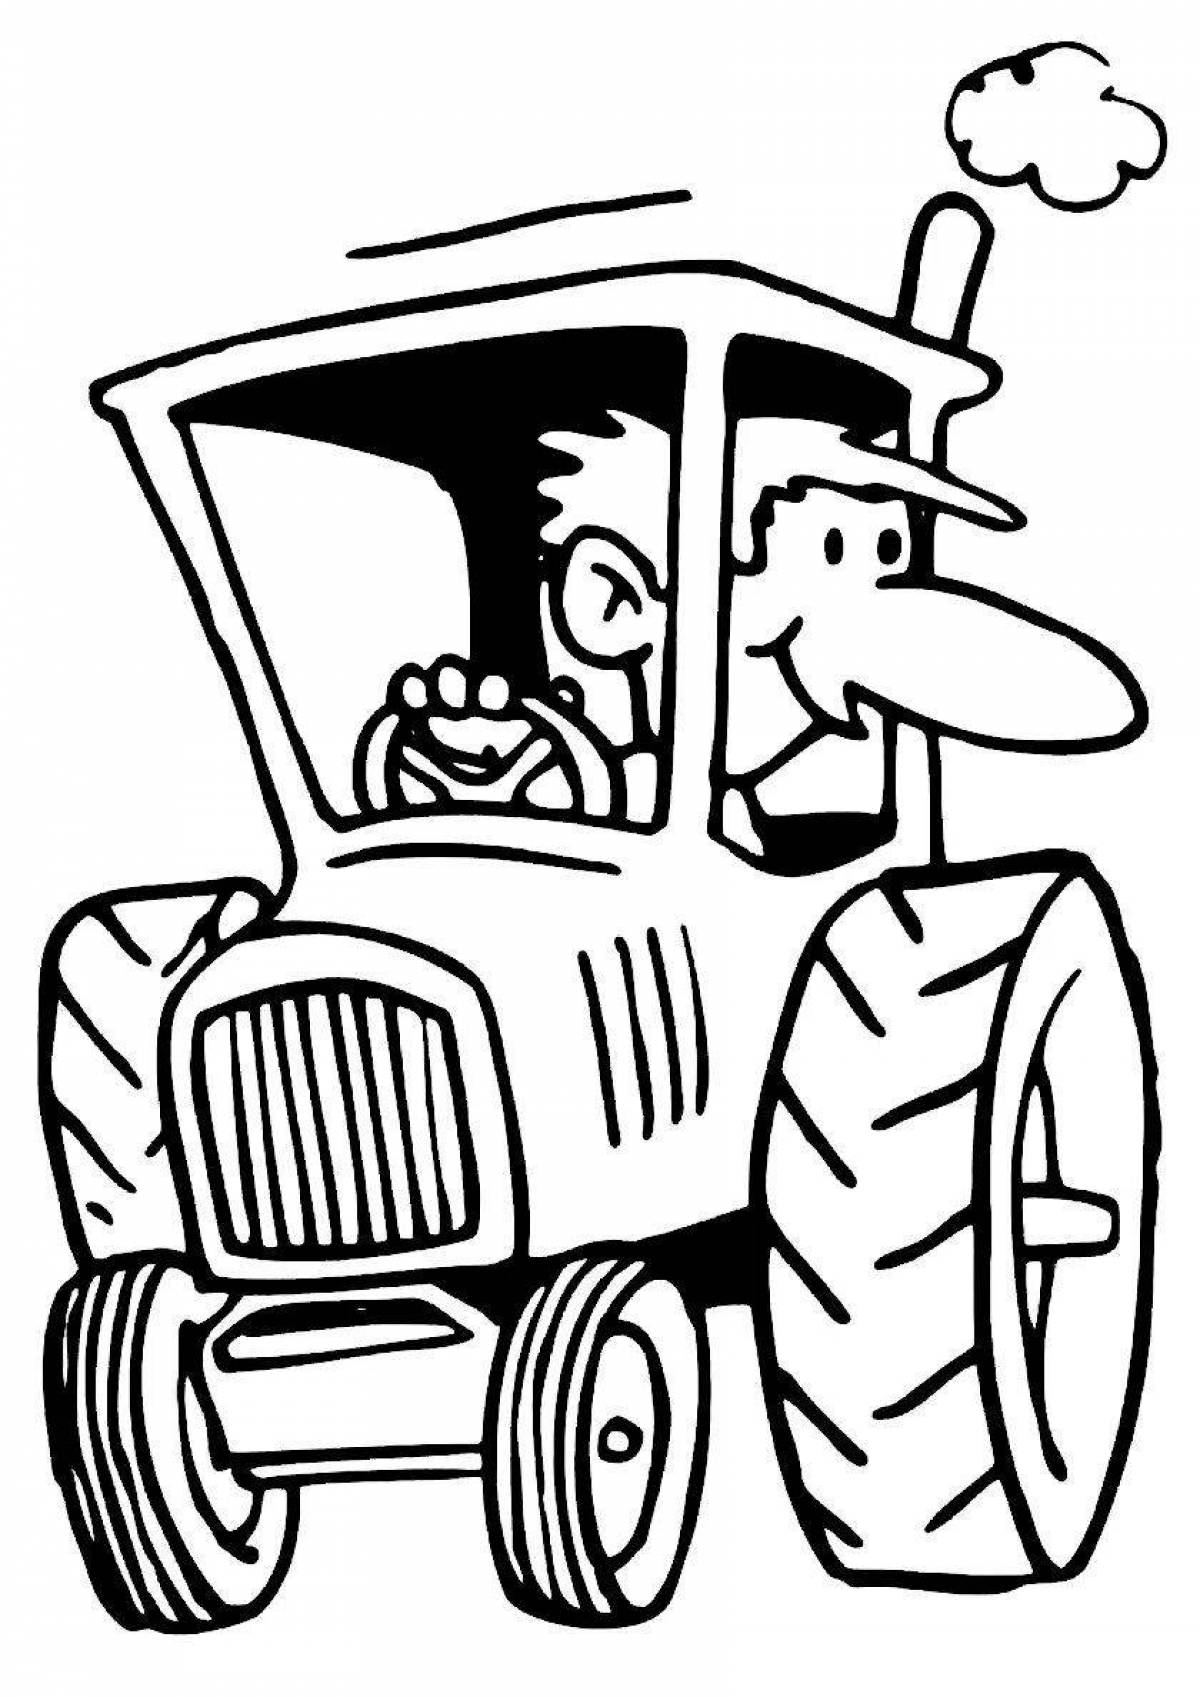 Coloring page joyful tractor driver